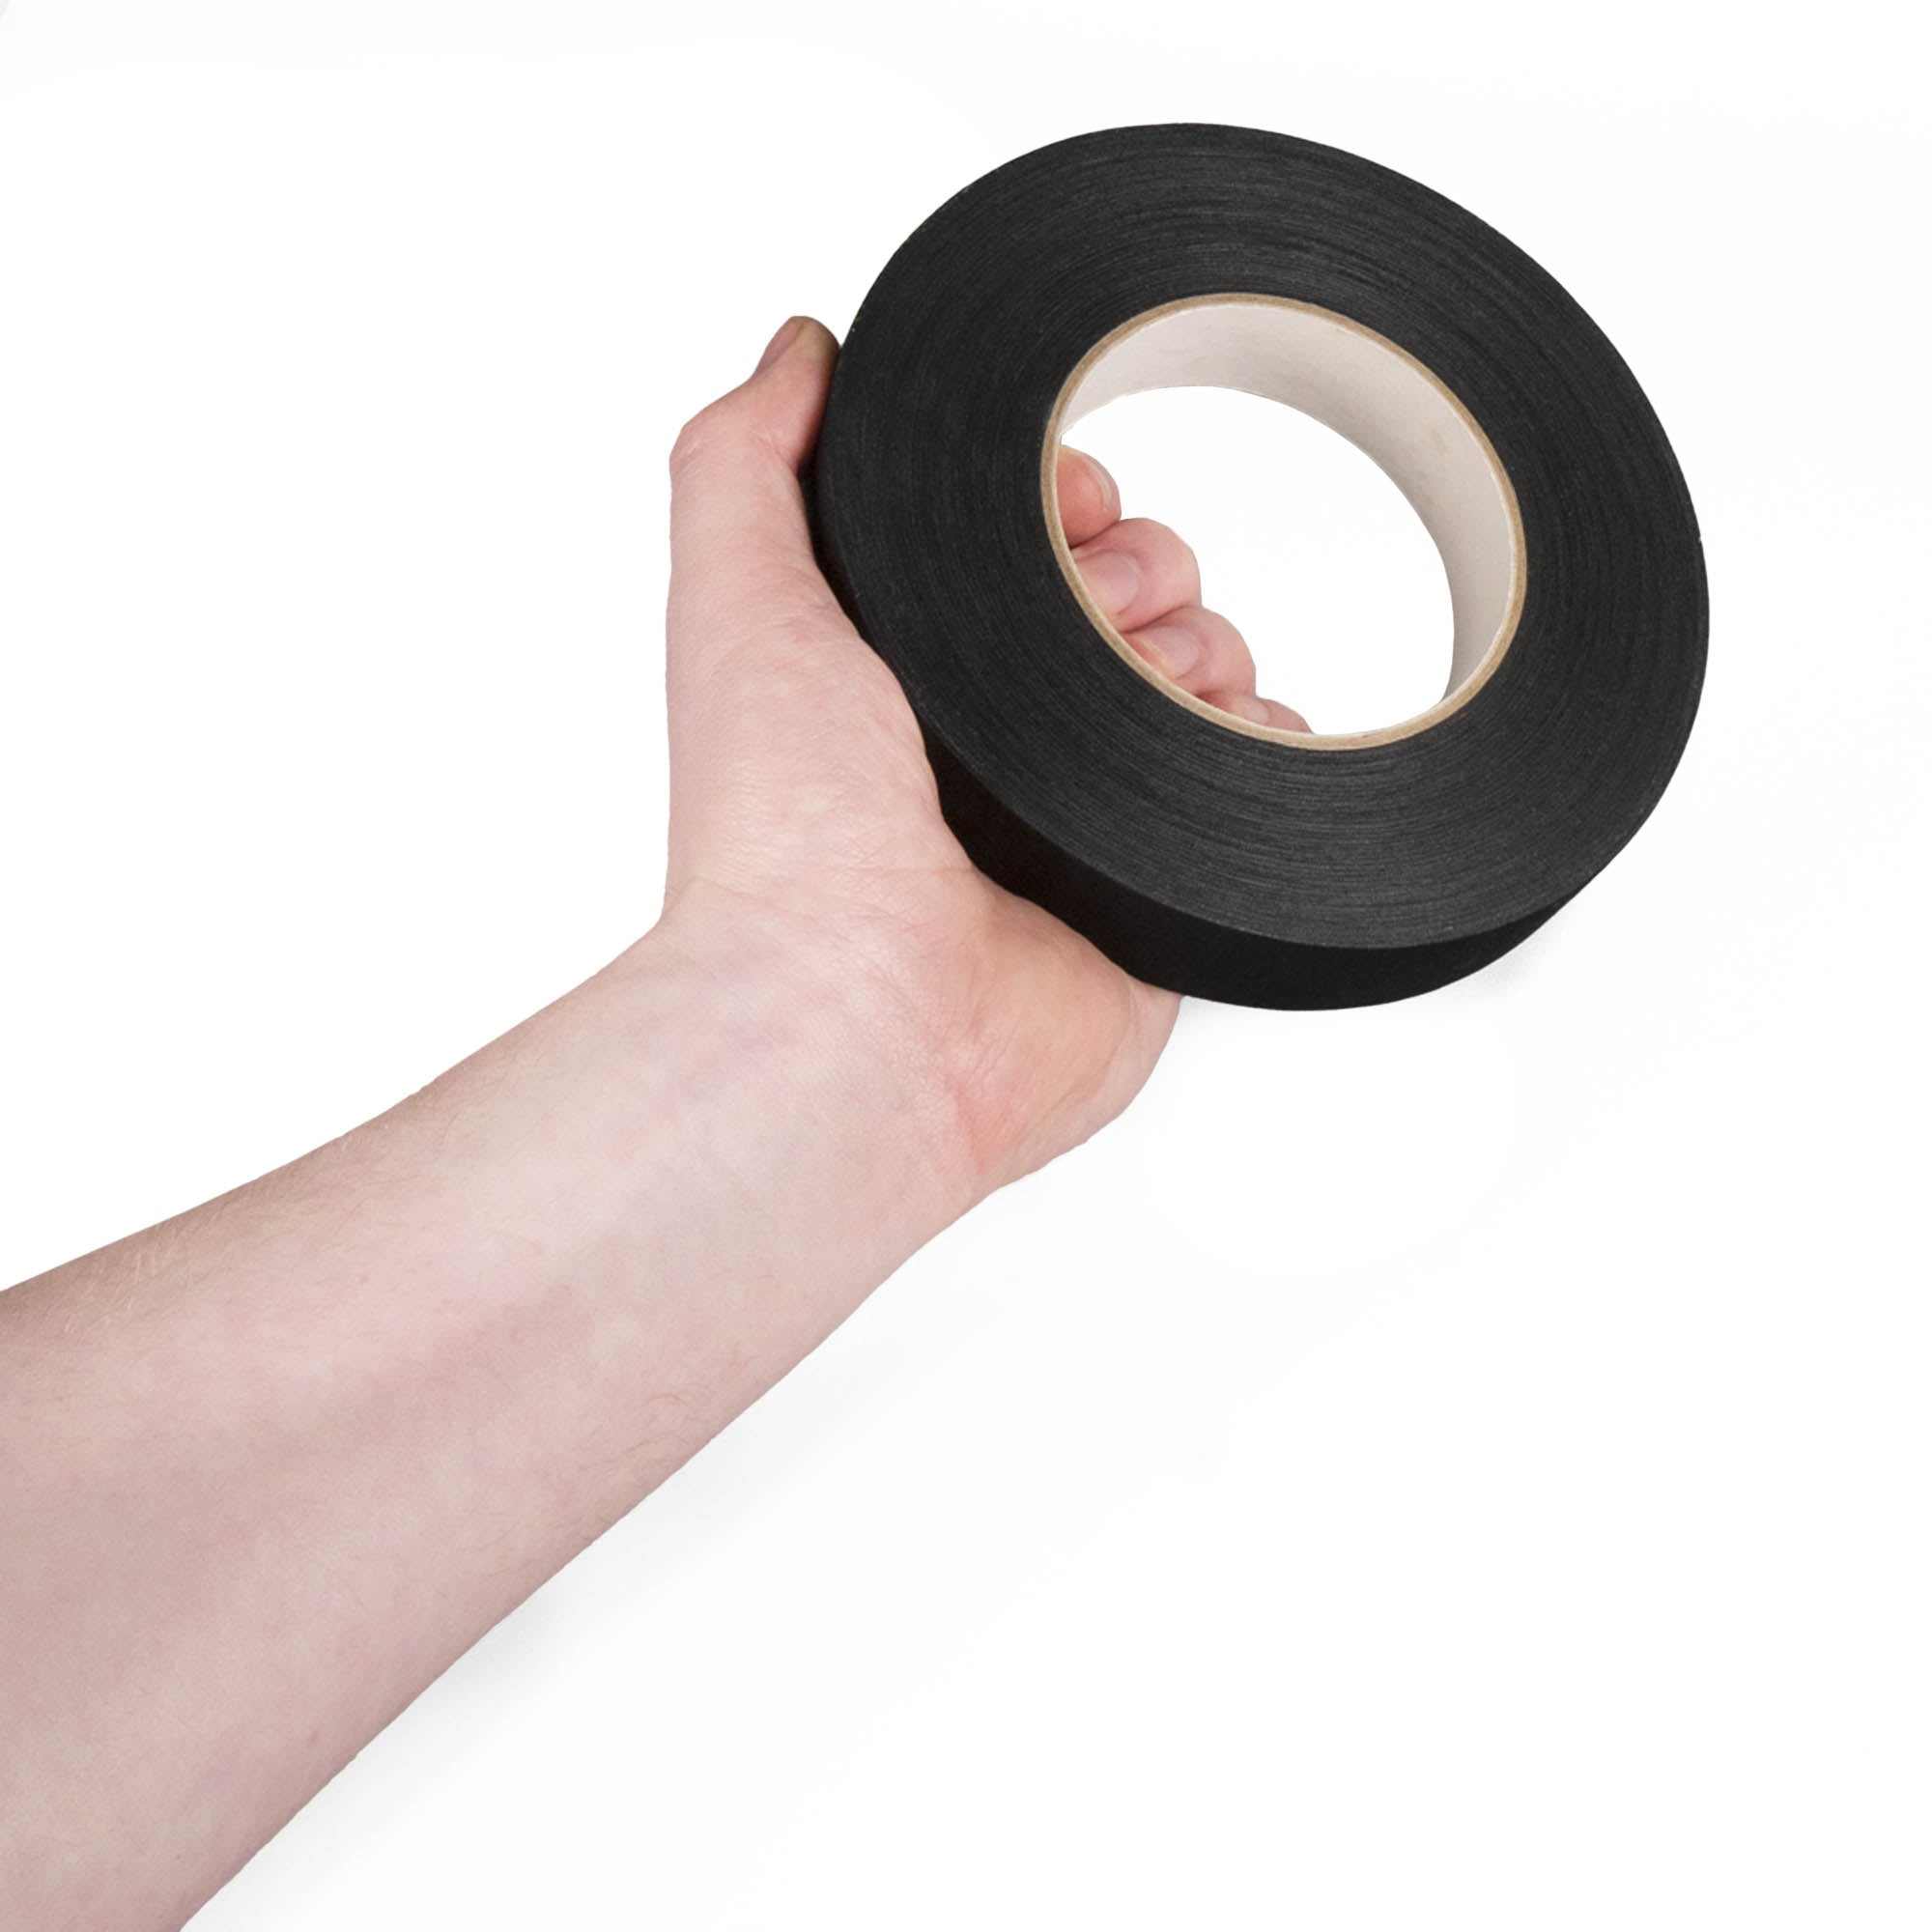 2.5cm wide tape in hand